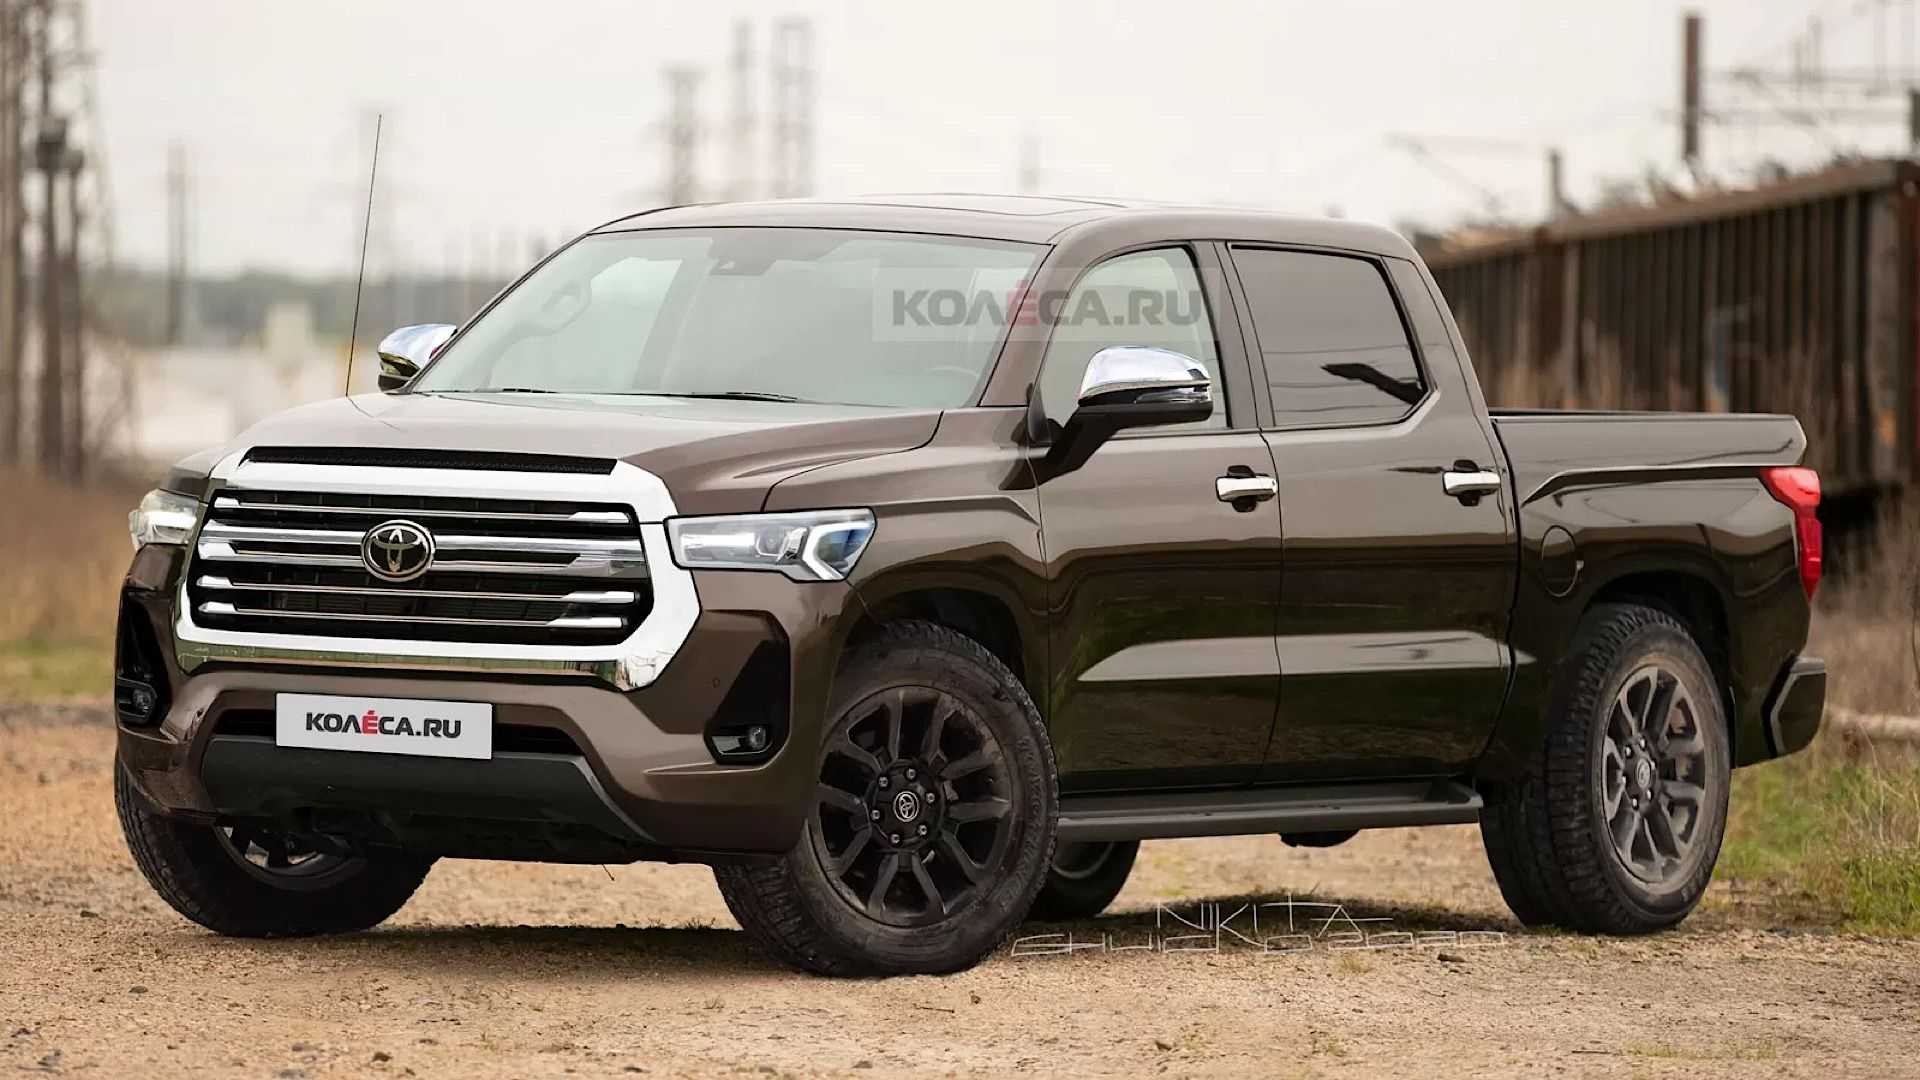 Next Gen Toyota Tundra Renderings Preview New Look For Old Truck